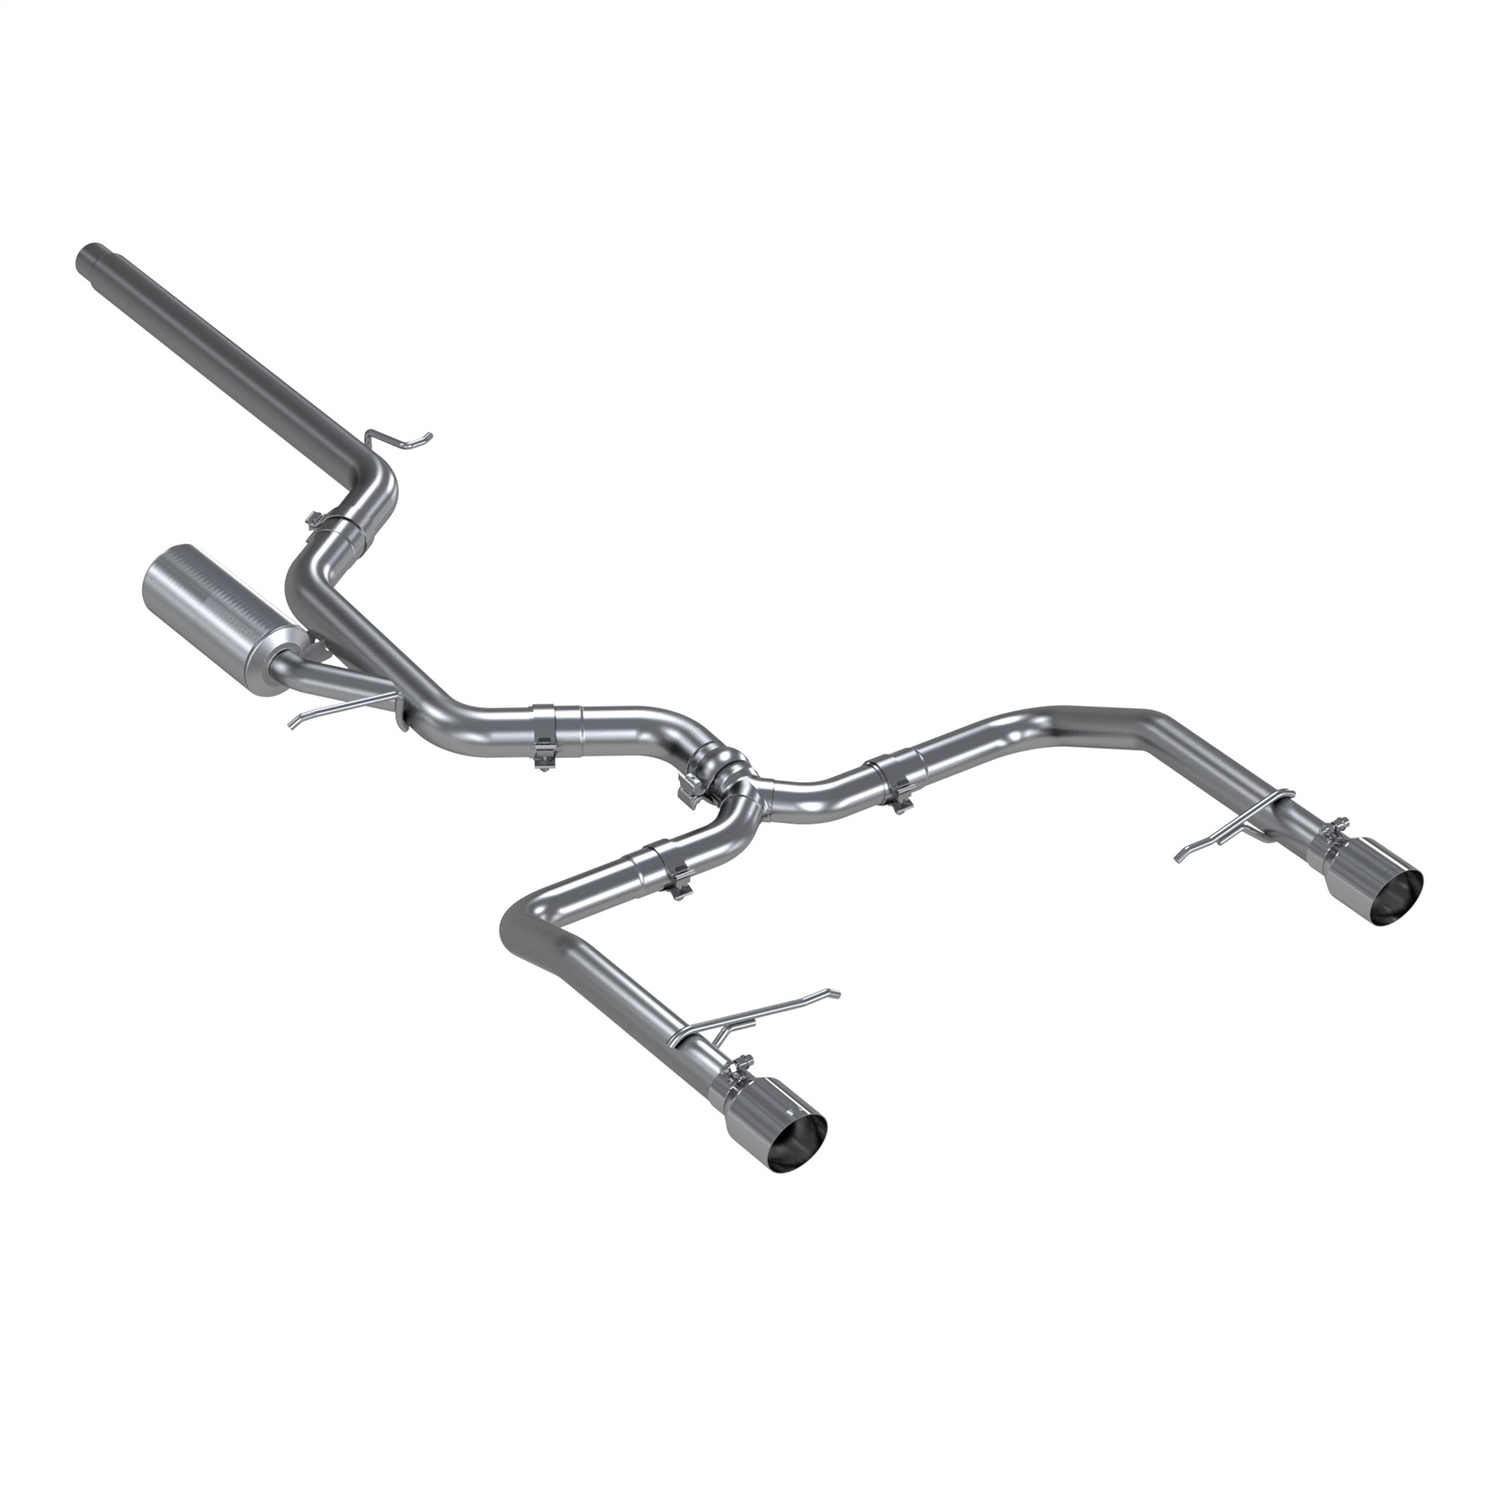 MBRP Exhaust S4608304 Armor Pro Cat Back Exhaust System Fits 19-21 Jetta